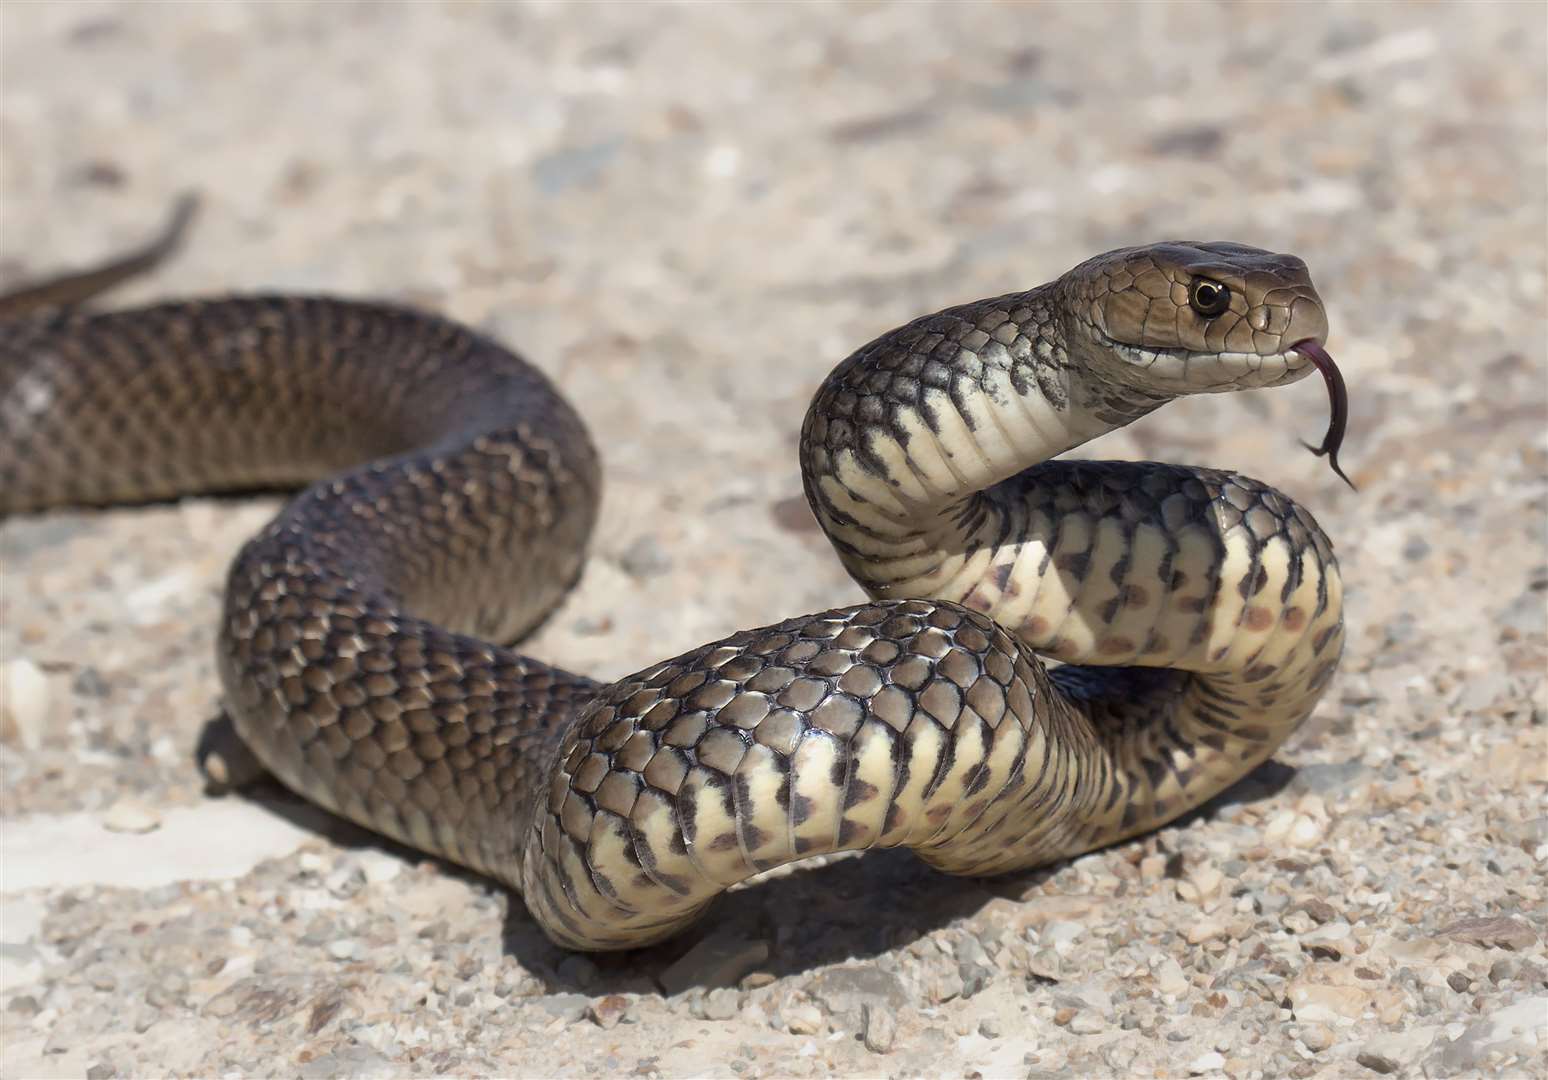 An eastern brown snake. Credit: istock/KristianBell